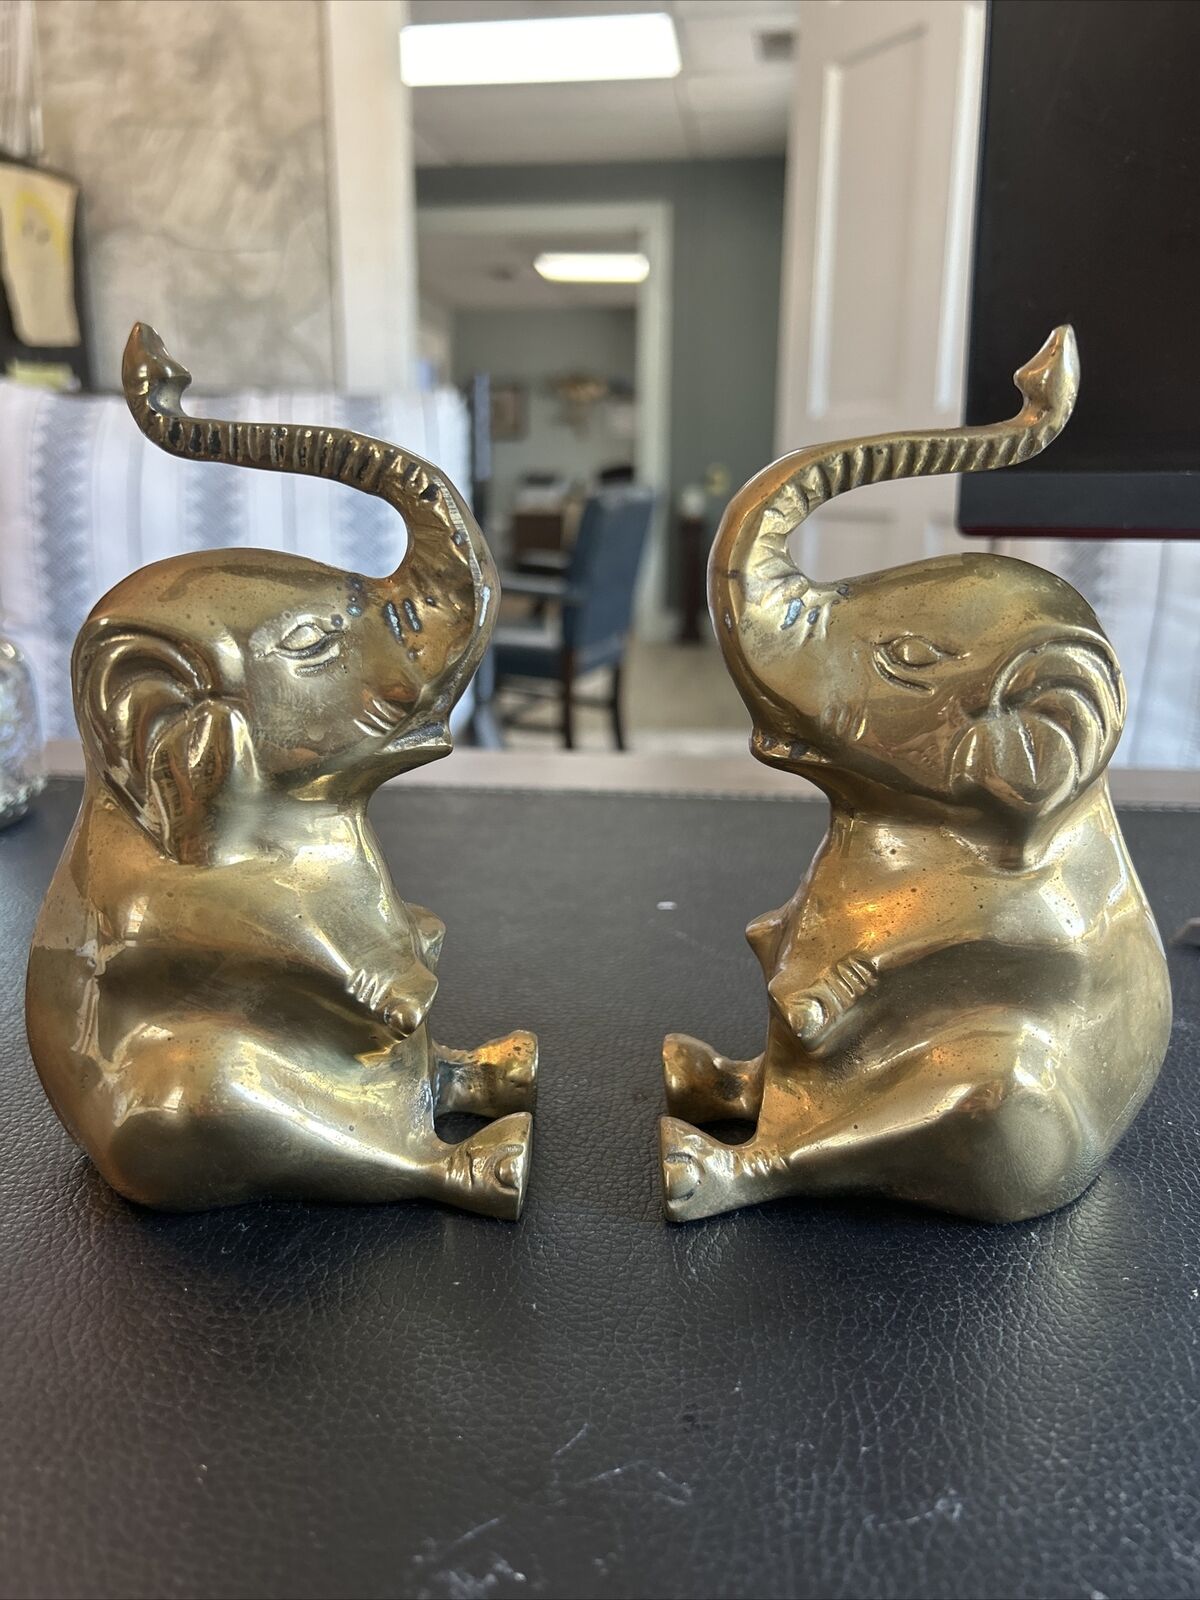 Vintage Set of 2 Solid Brass Elephant Bookends 6” Tall with Trunk Up